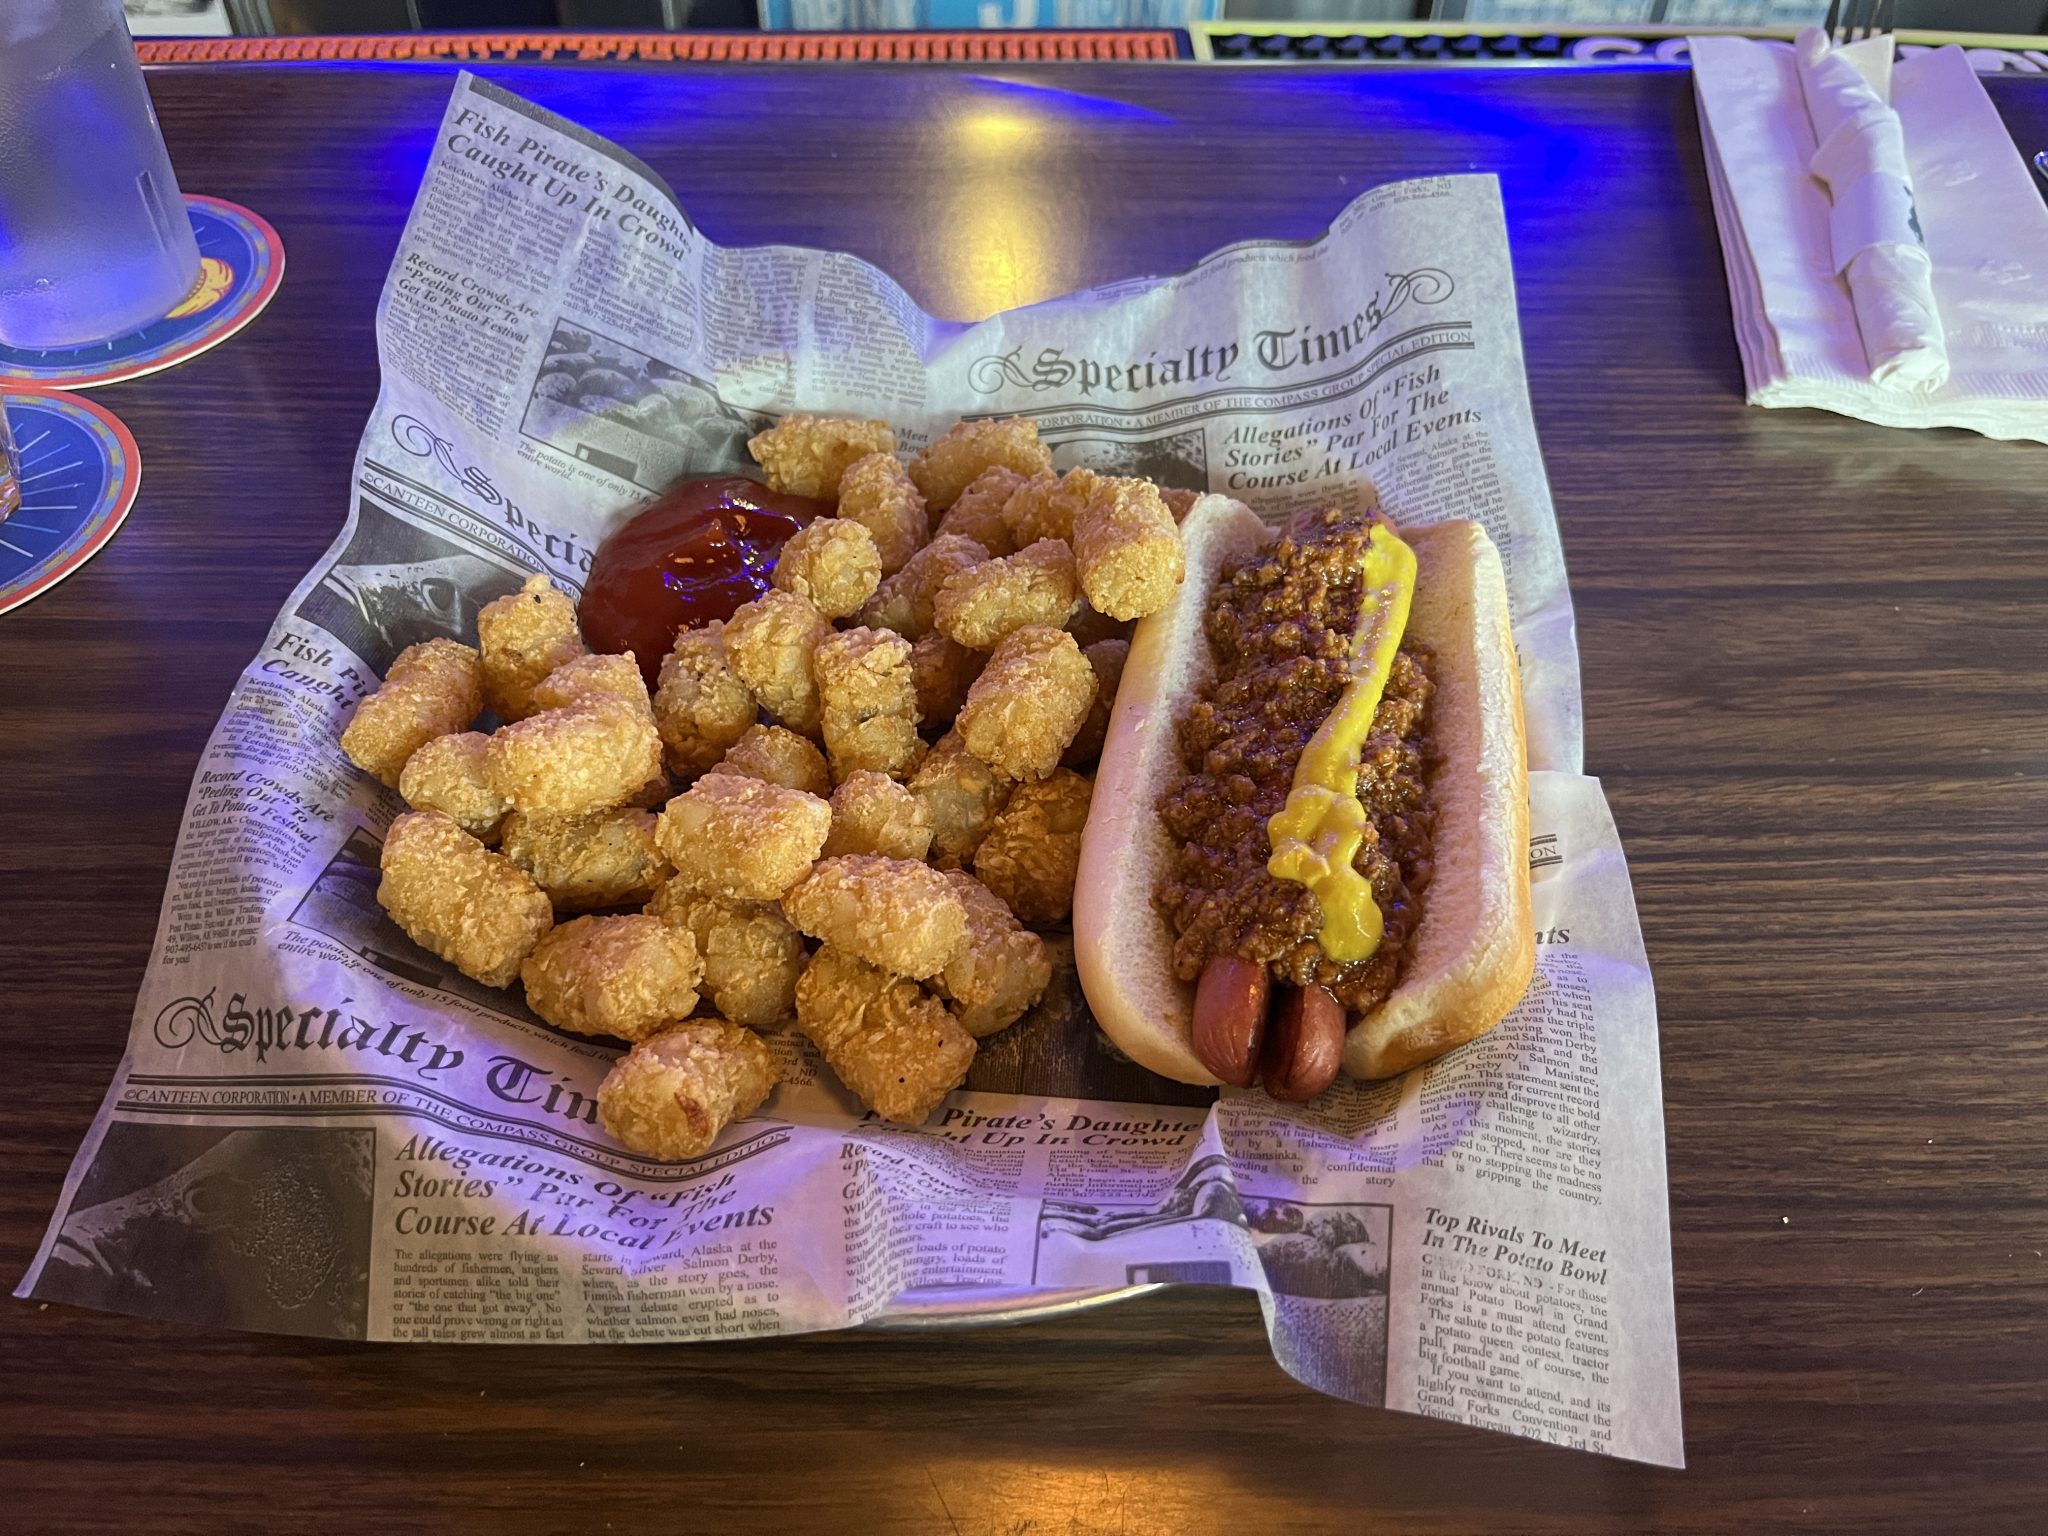 A plastic bowl lined with fake newsprint paper holding a chilidog (on the right) with a stripe of mustard and a big pile of tater tots on the left with a puddle of catsup next to them.